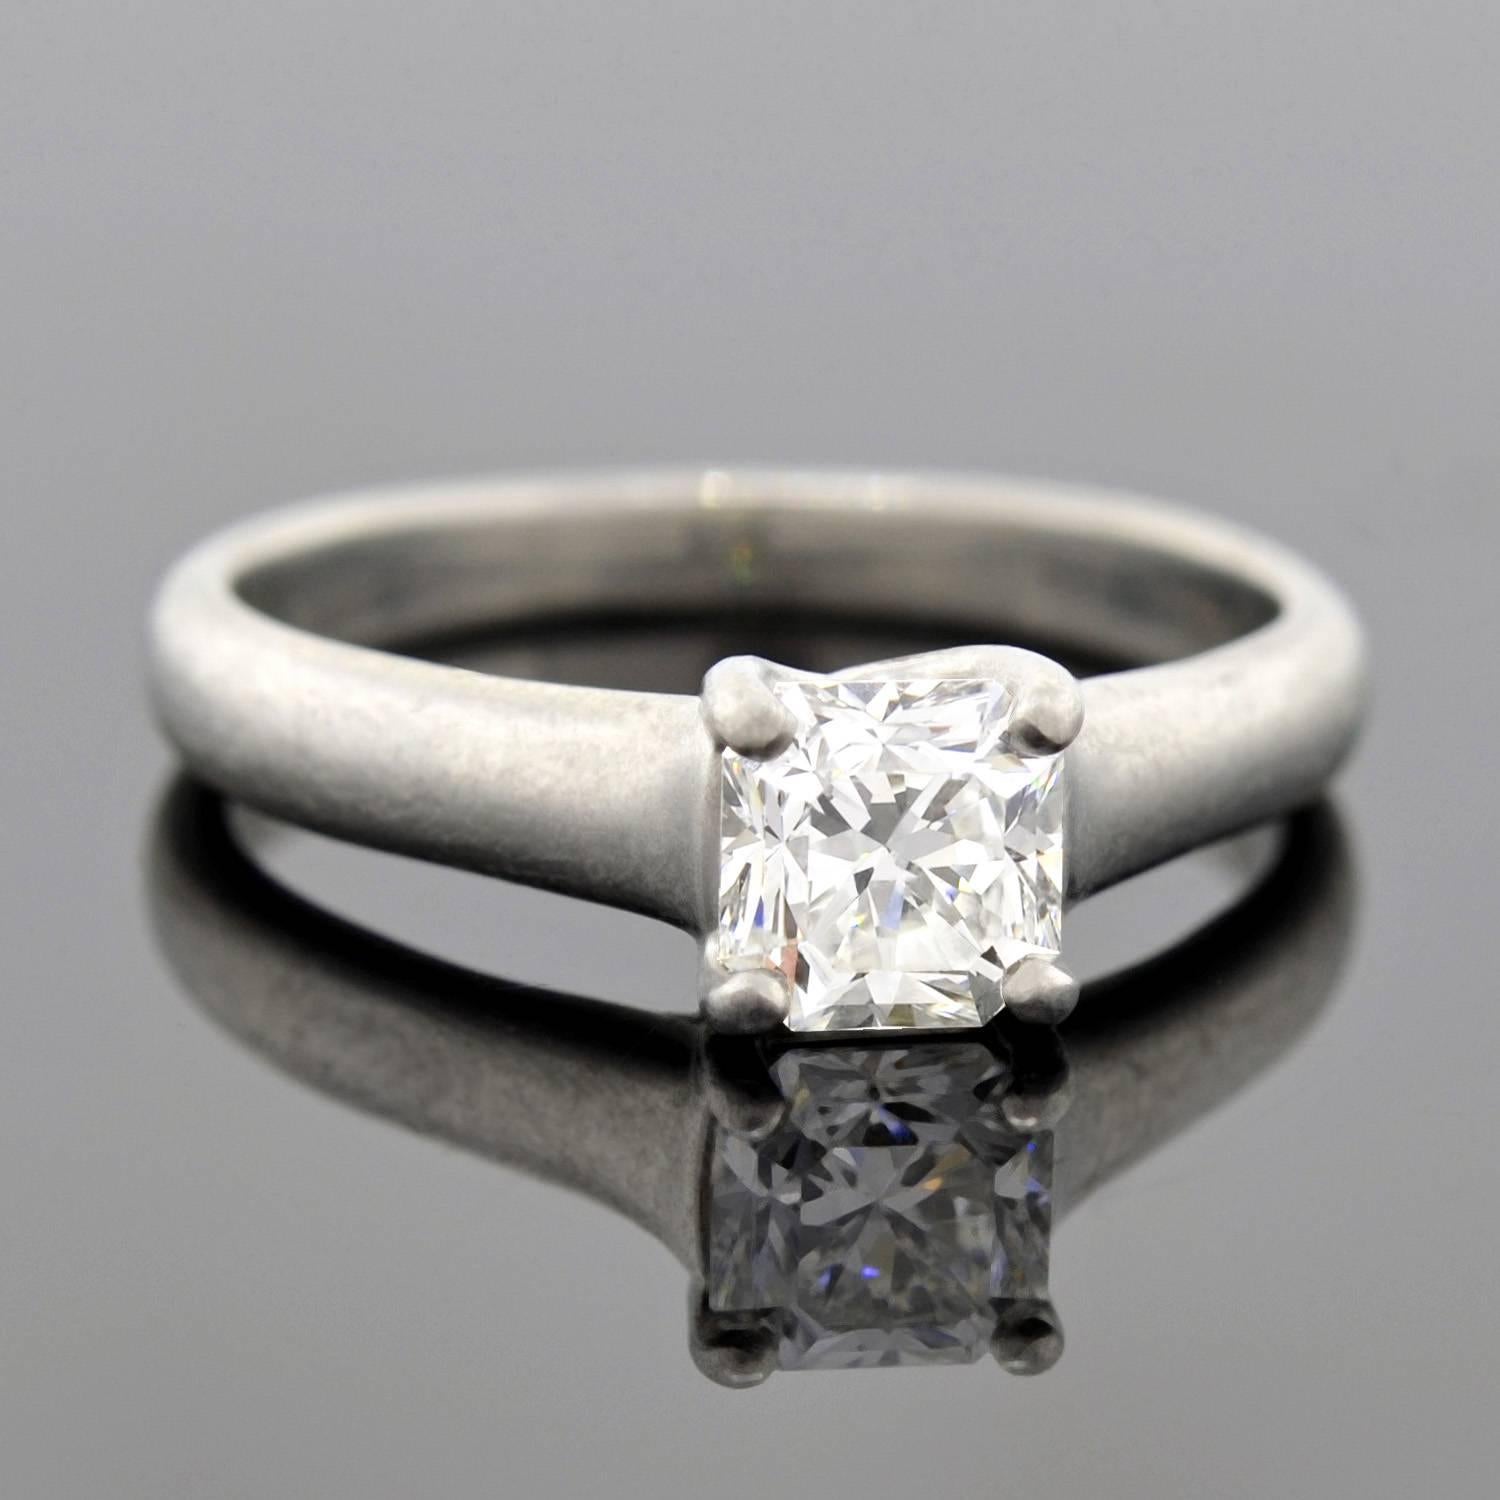 This gorgeous estate diamond engagement ring is an original Tiffany & Co. design! Named the "Lucida ®" Diamond ring, it features a beautiful mixed cut diamond at the center of a platinum solitaire setting.

As described by Tiffany